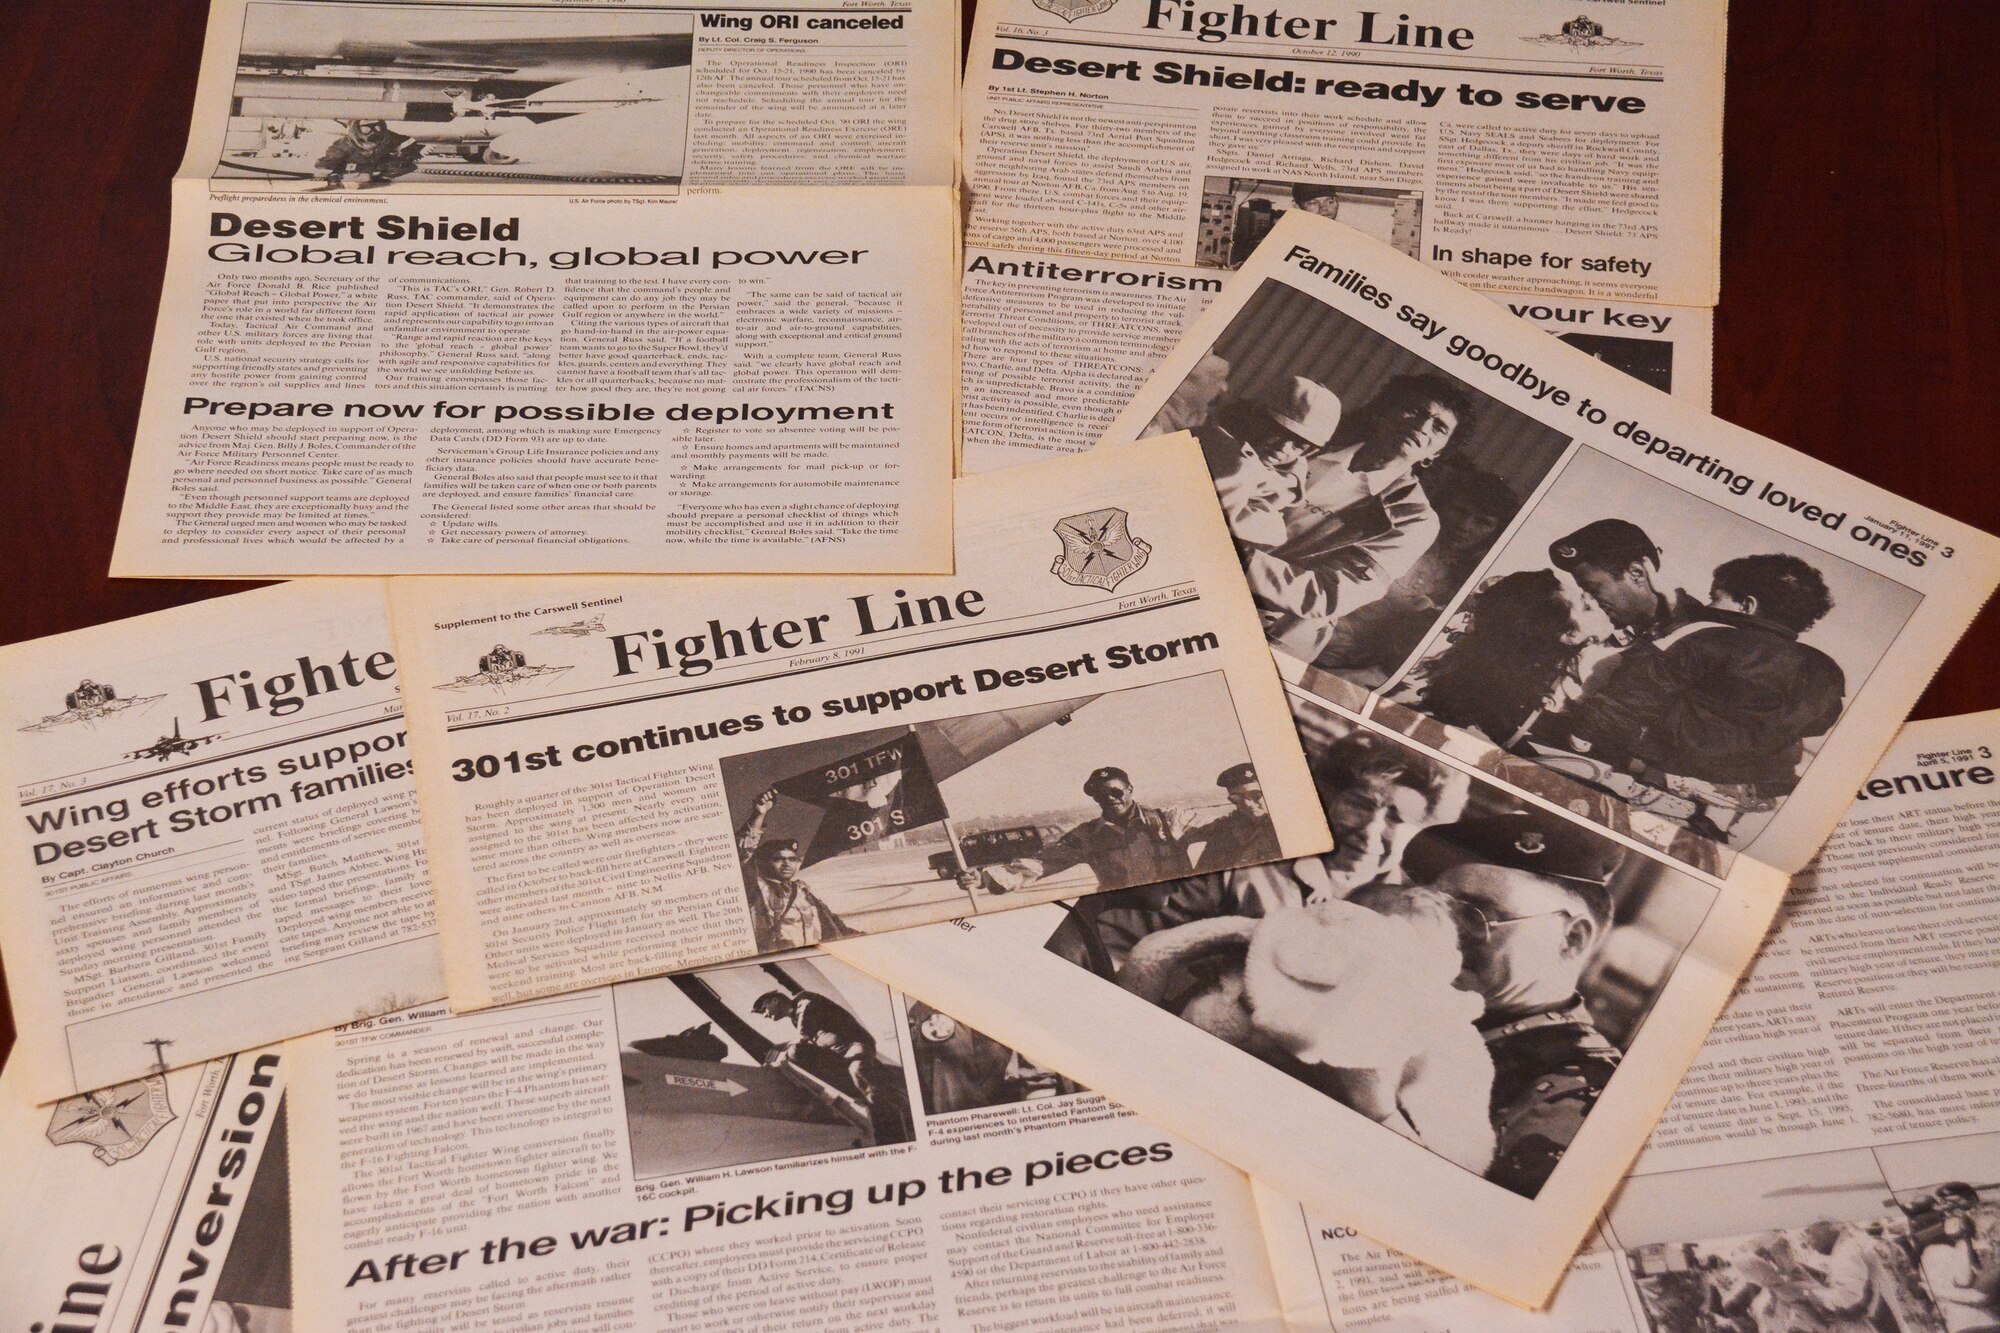 The 301st Fighter wing, then known as the 301st Tactical Fighter Wing, Fighter Line newspapers from late 1990 to early 1991 reflects the full support provided during operations Desert Shield and Desert Storm.  More than 70 wing Airmen deployed in an Air Force Reserve mobilization of more than 23,000 Reservists and another 15,000 serving in a volunteer capacity. (U.S. Air Force photo/Staff Sgt. Samantha Mathison)